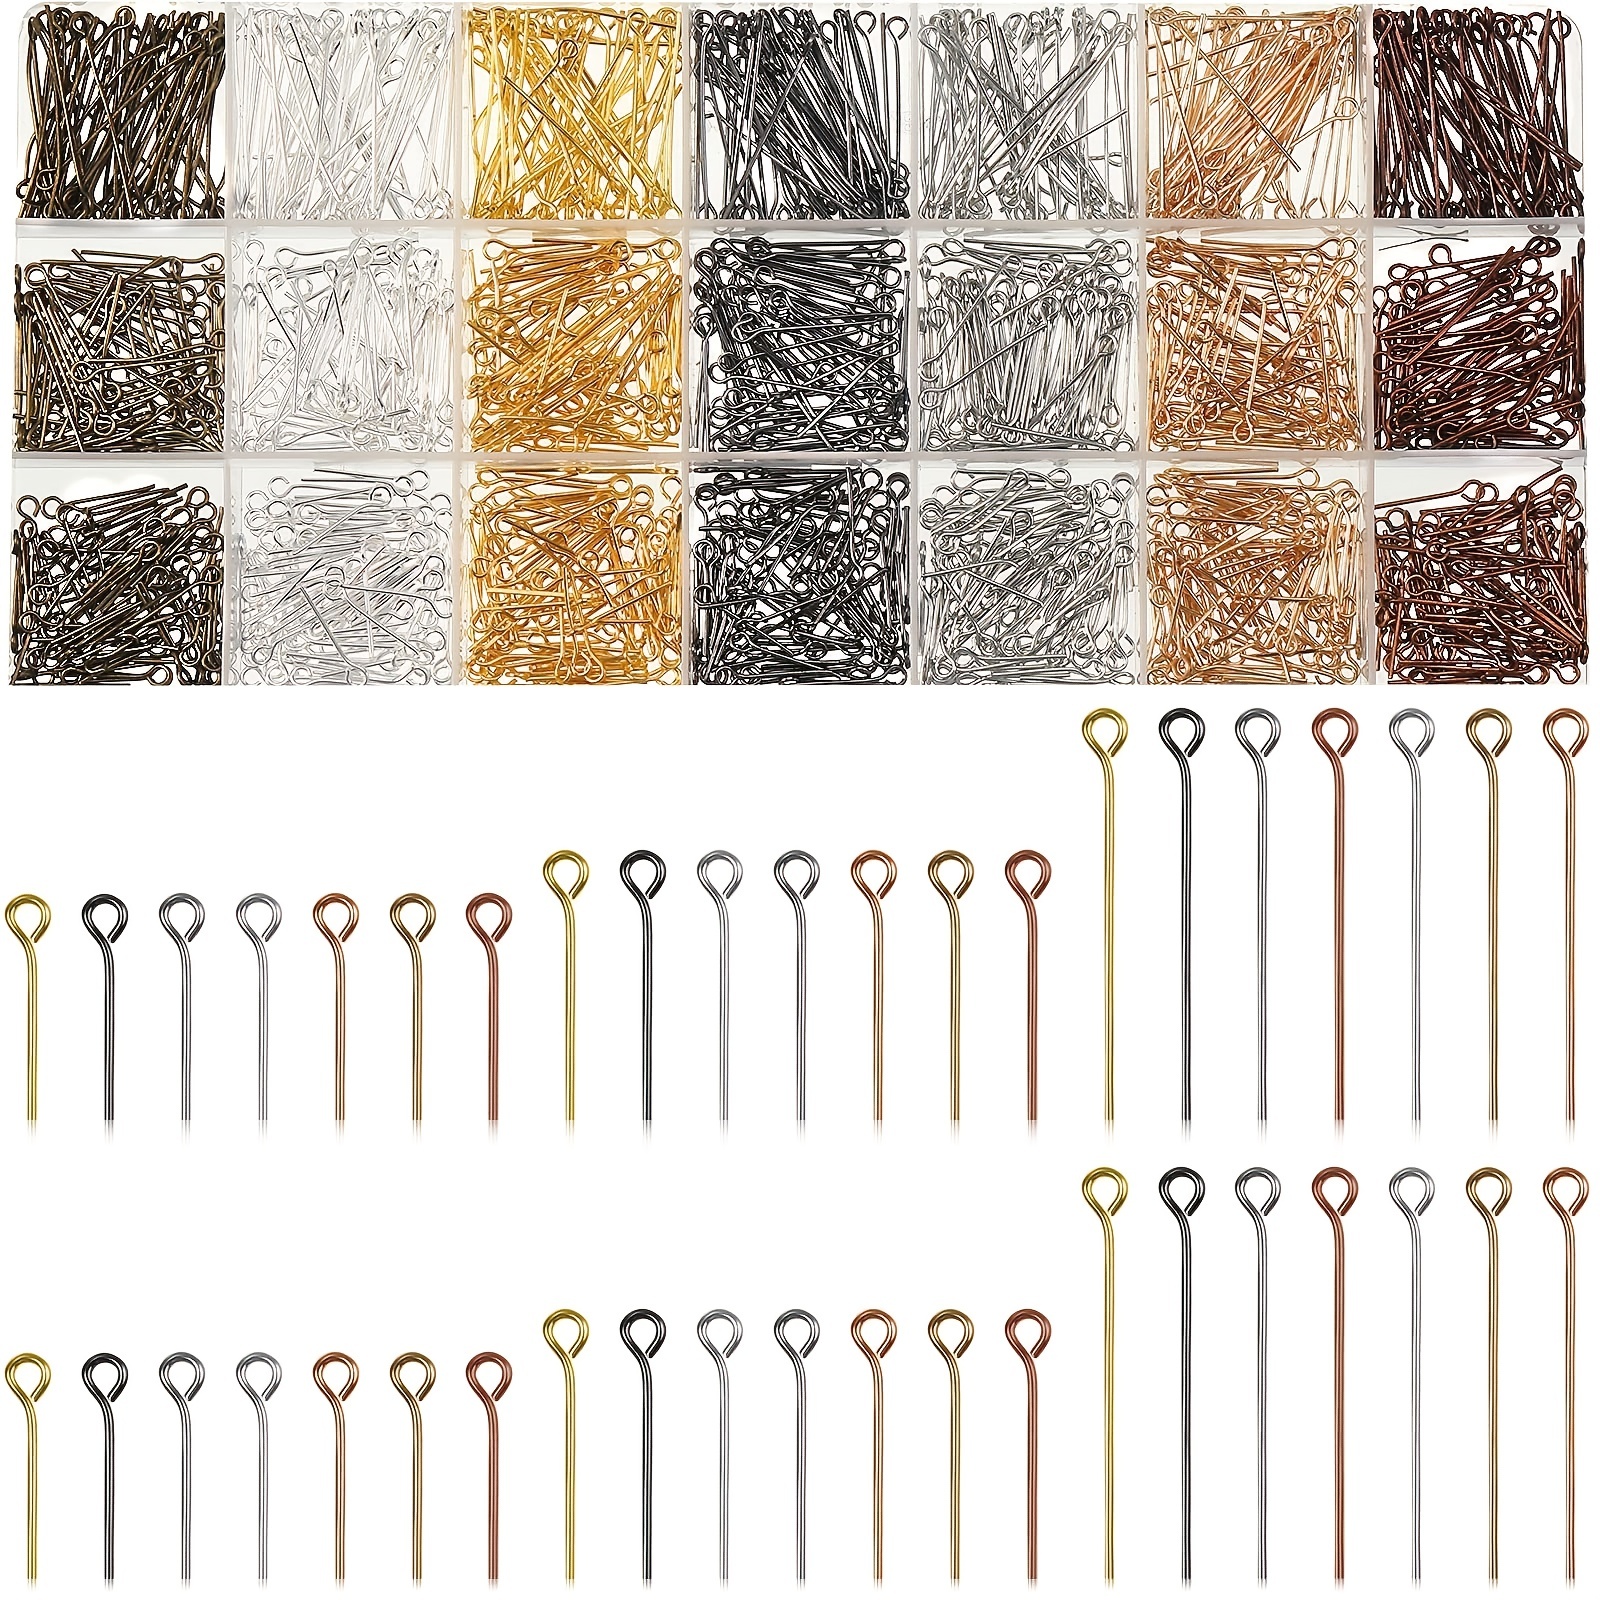 

1400pcs Retro Color Eye Pins Head Pin Kit, 3cm/2cm/1.6cm 3 Types Mixed 9 Character Needles/open Eye Needles For Diy Jewelry Making Supplies, Golden Diy